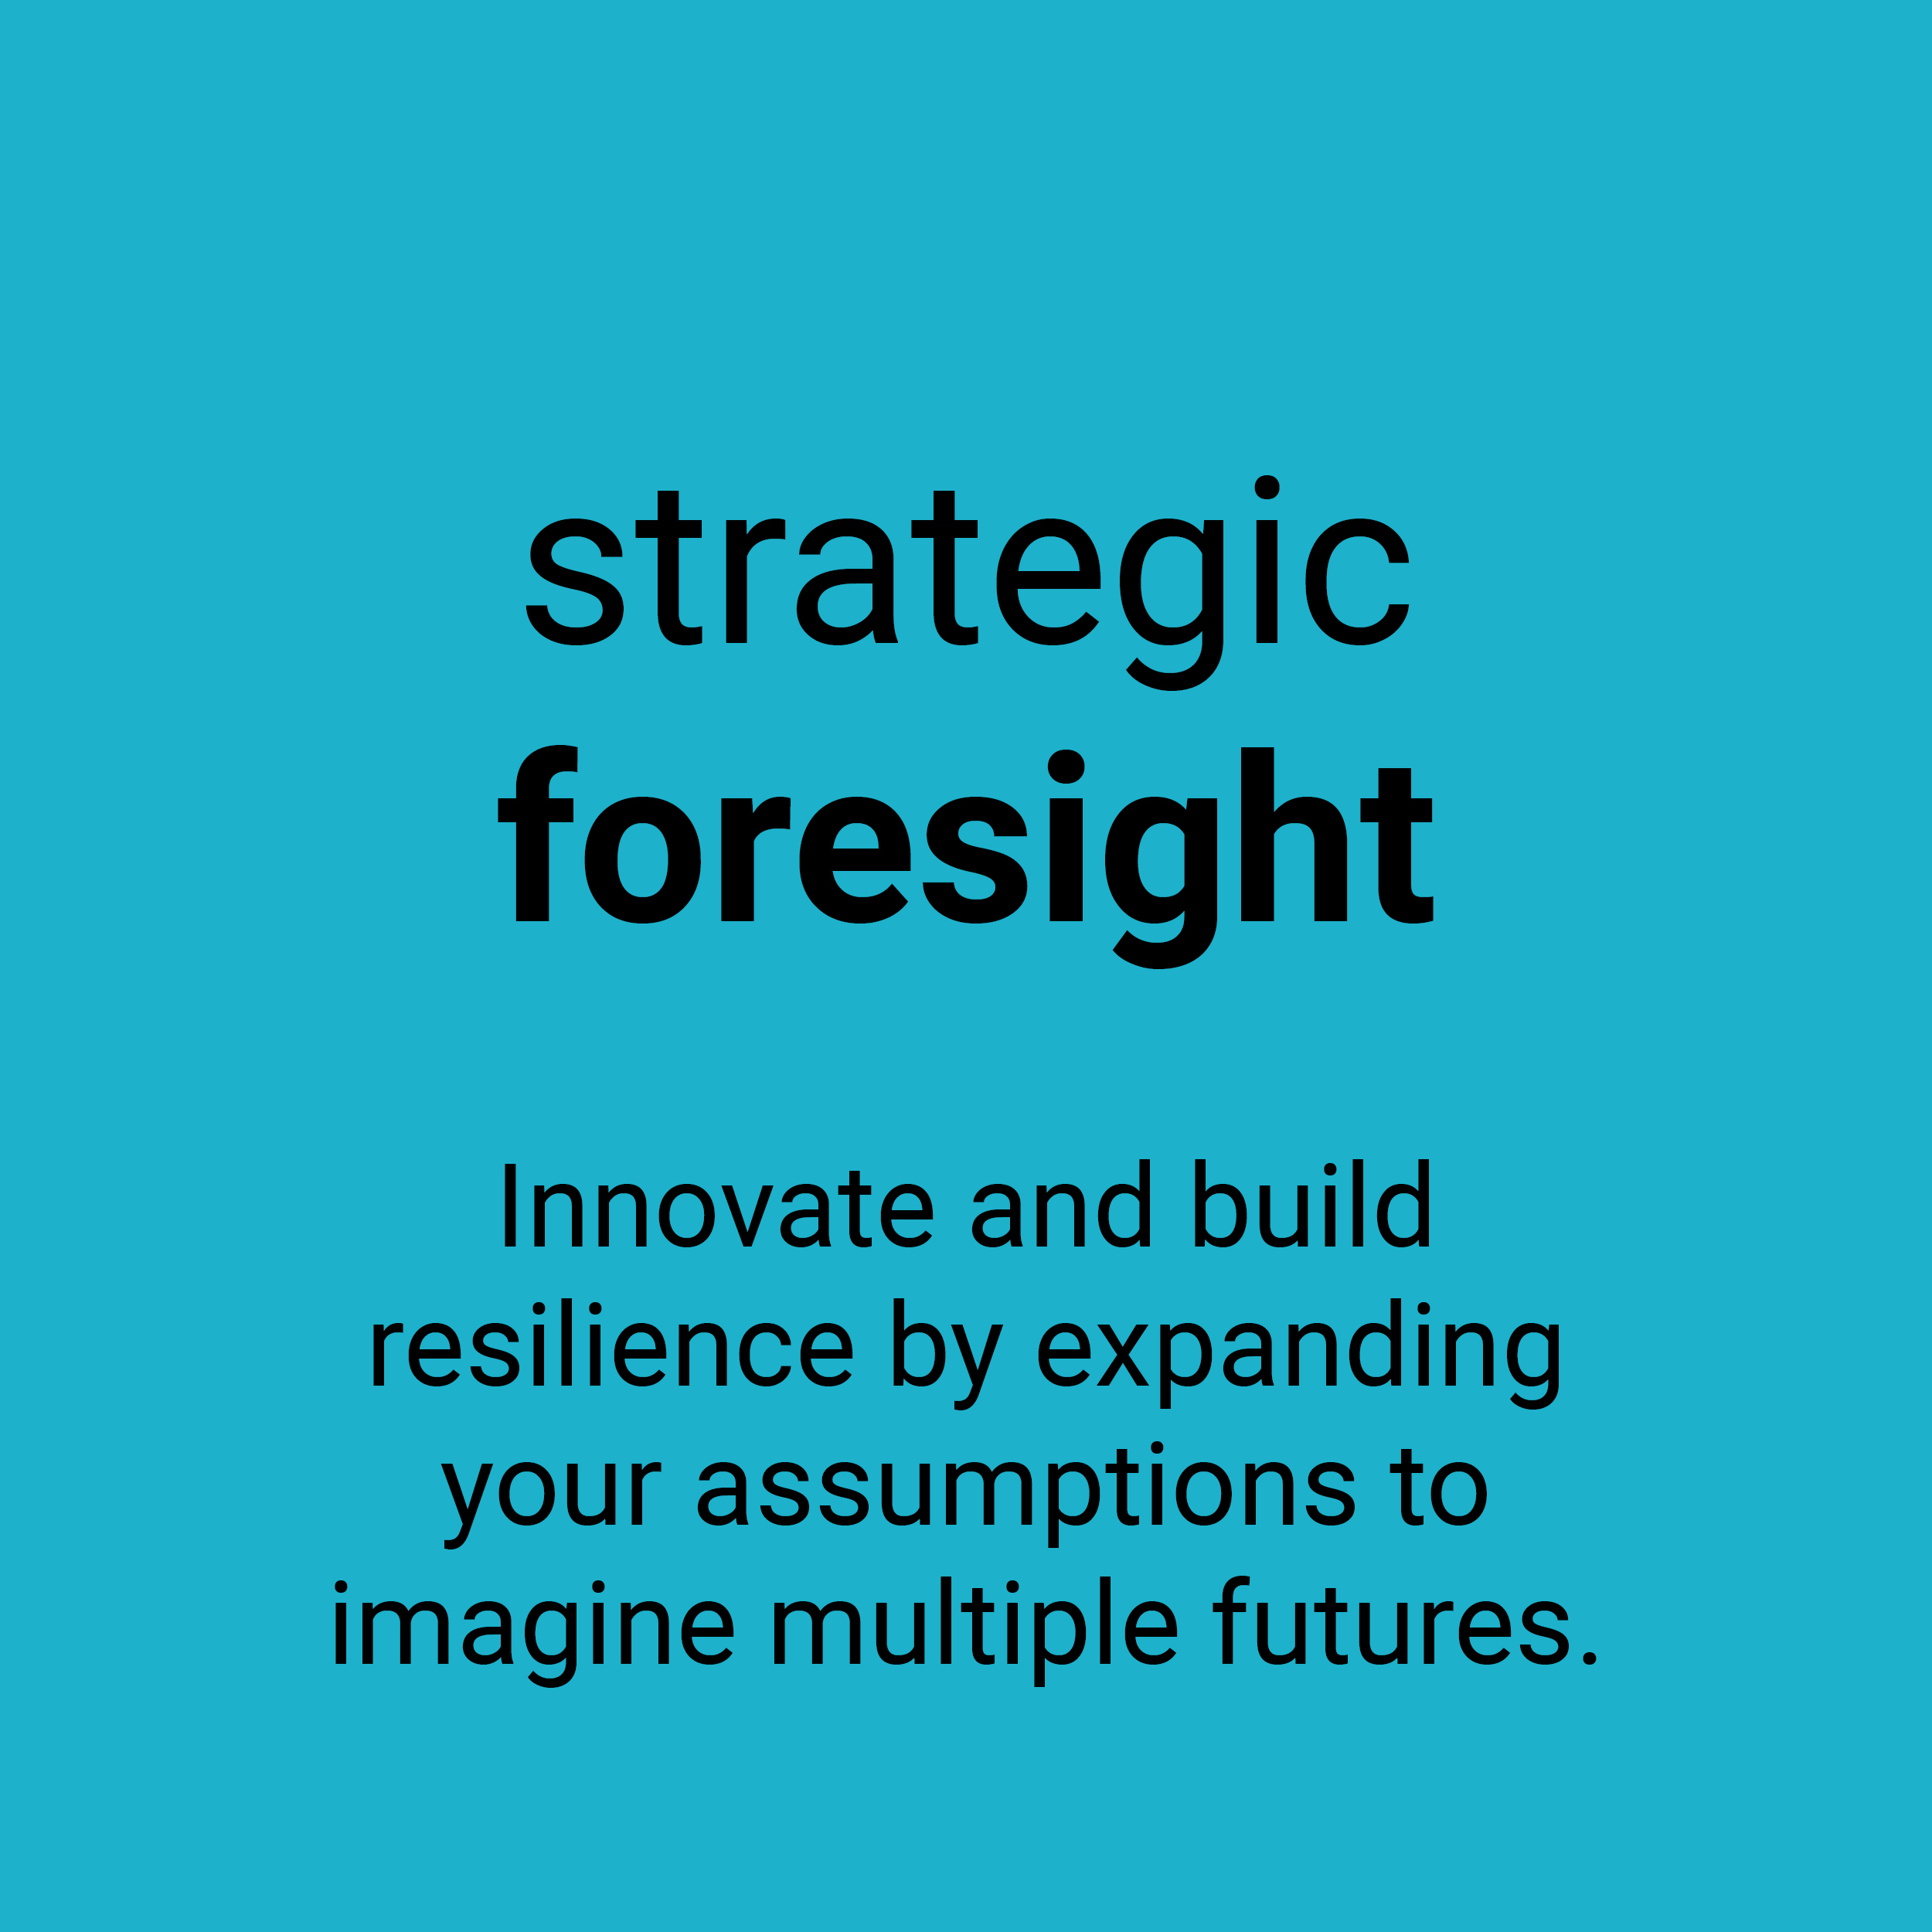 Strategic foresight. Innovate and build resilience by expanding your assumptions to imagine multiple futures.